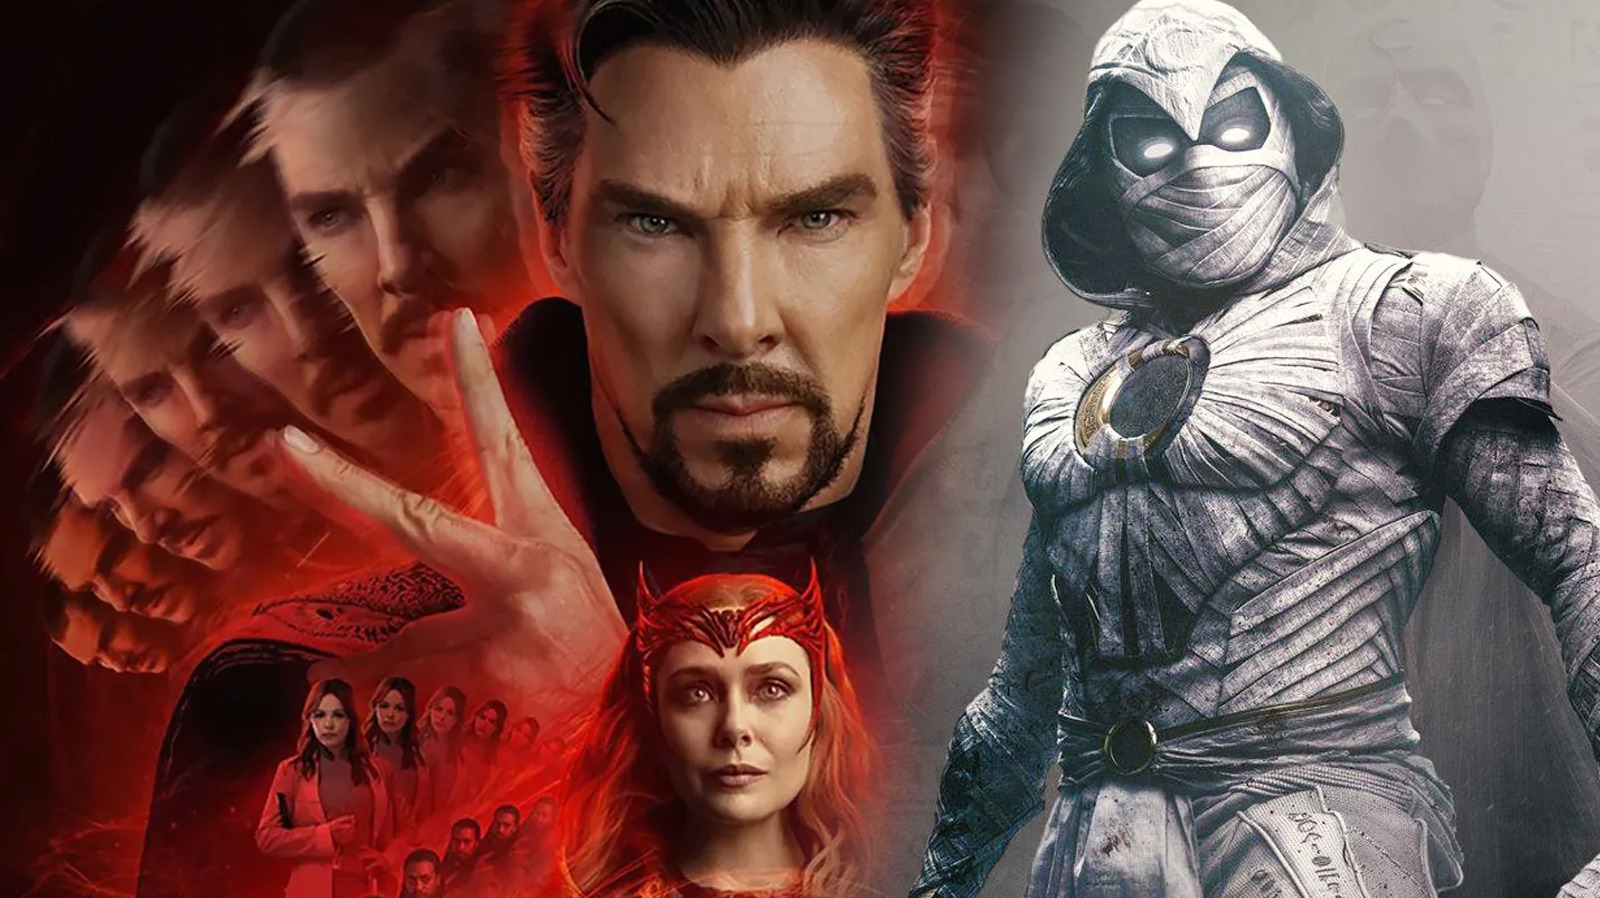 Doctor Strange In The Multiverse Of Madness Gives The MCU An Immediate Course-Correction After Moon Knight